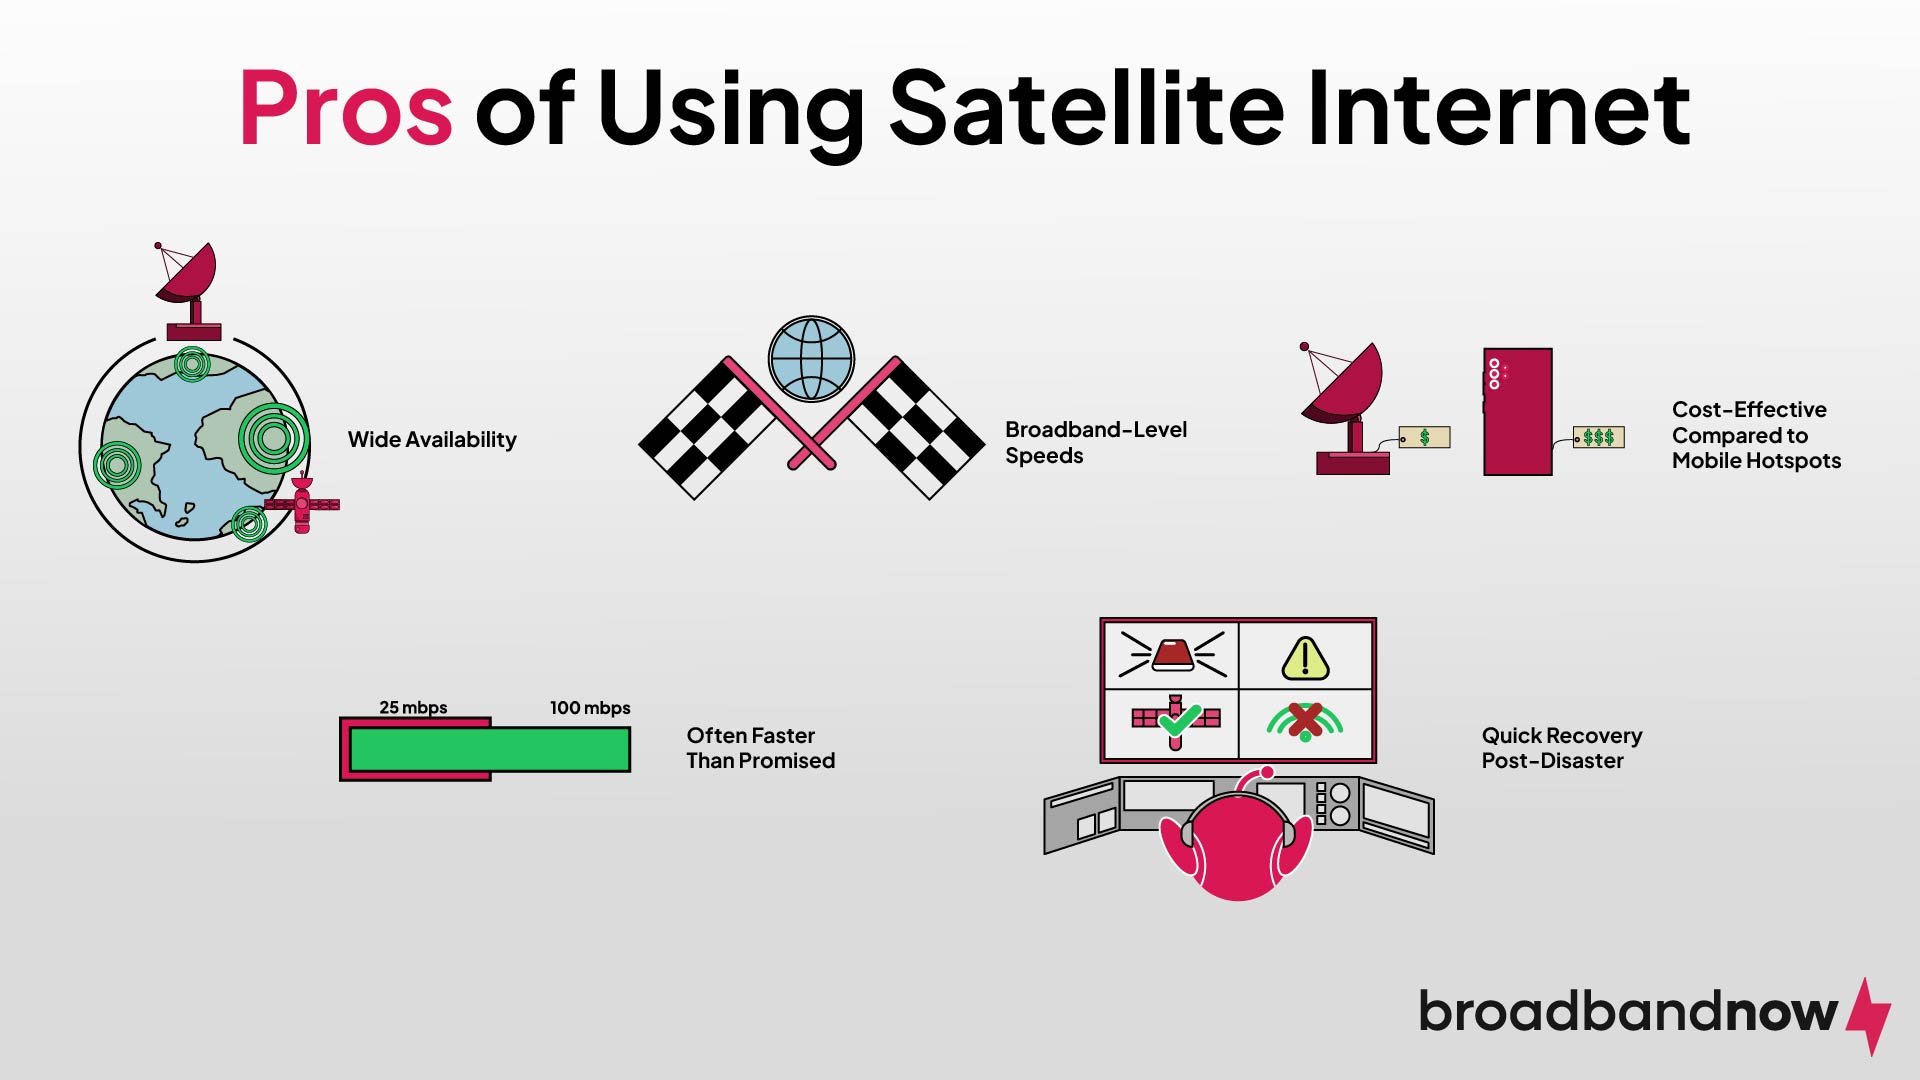 A graphic design image depicting the pros of satellite internet via various icons.